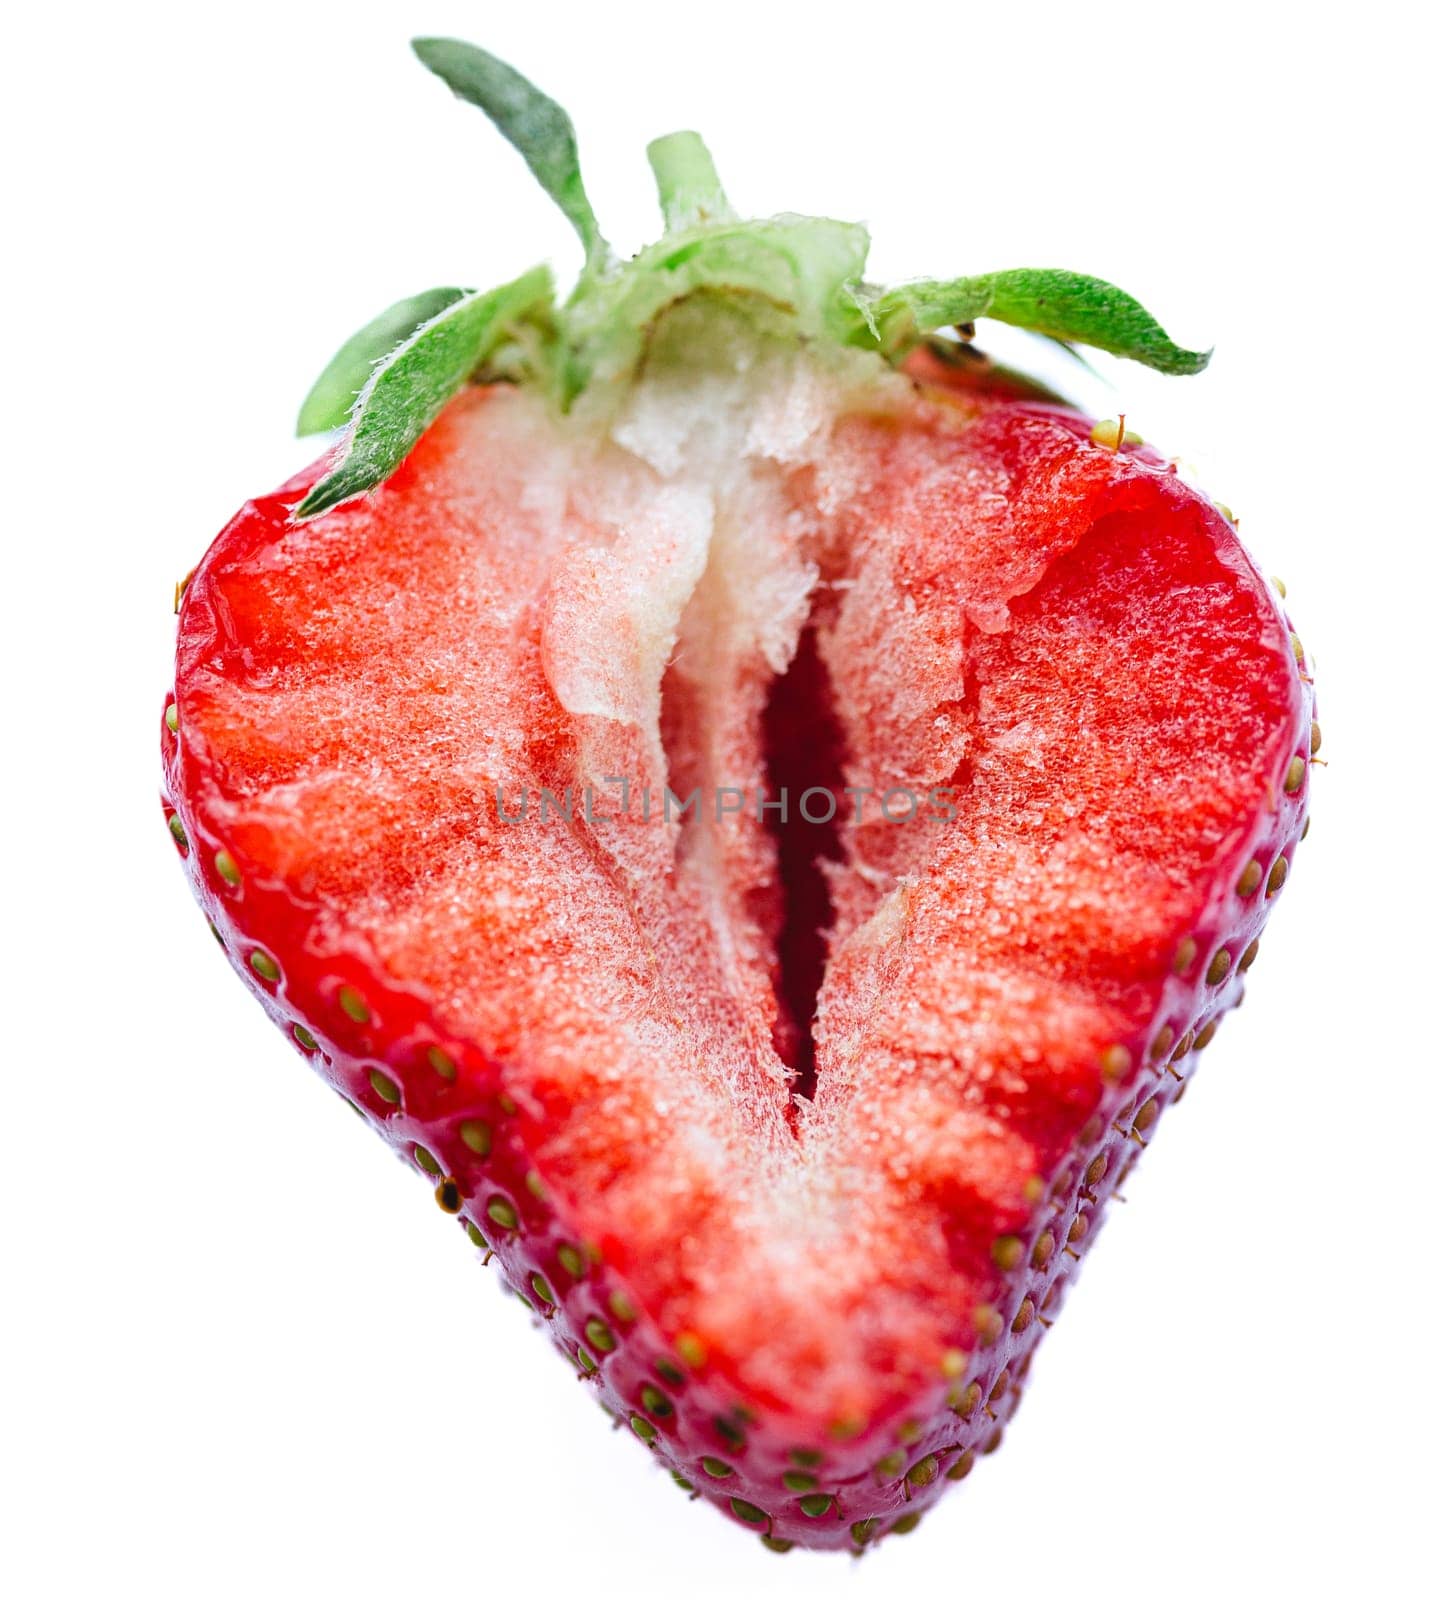 Ripe half of a strawberry on a white background. Shallow dof